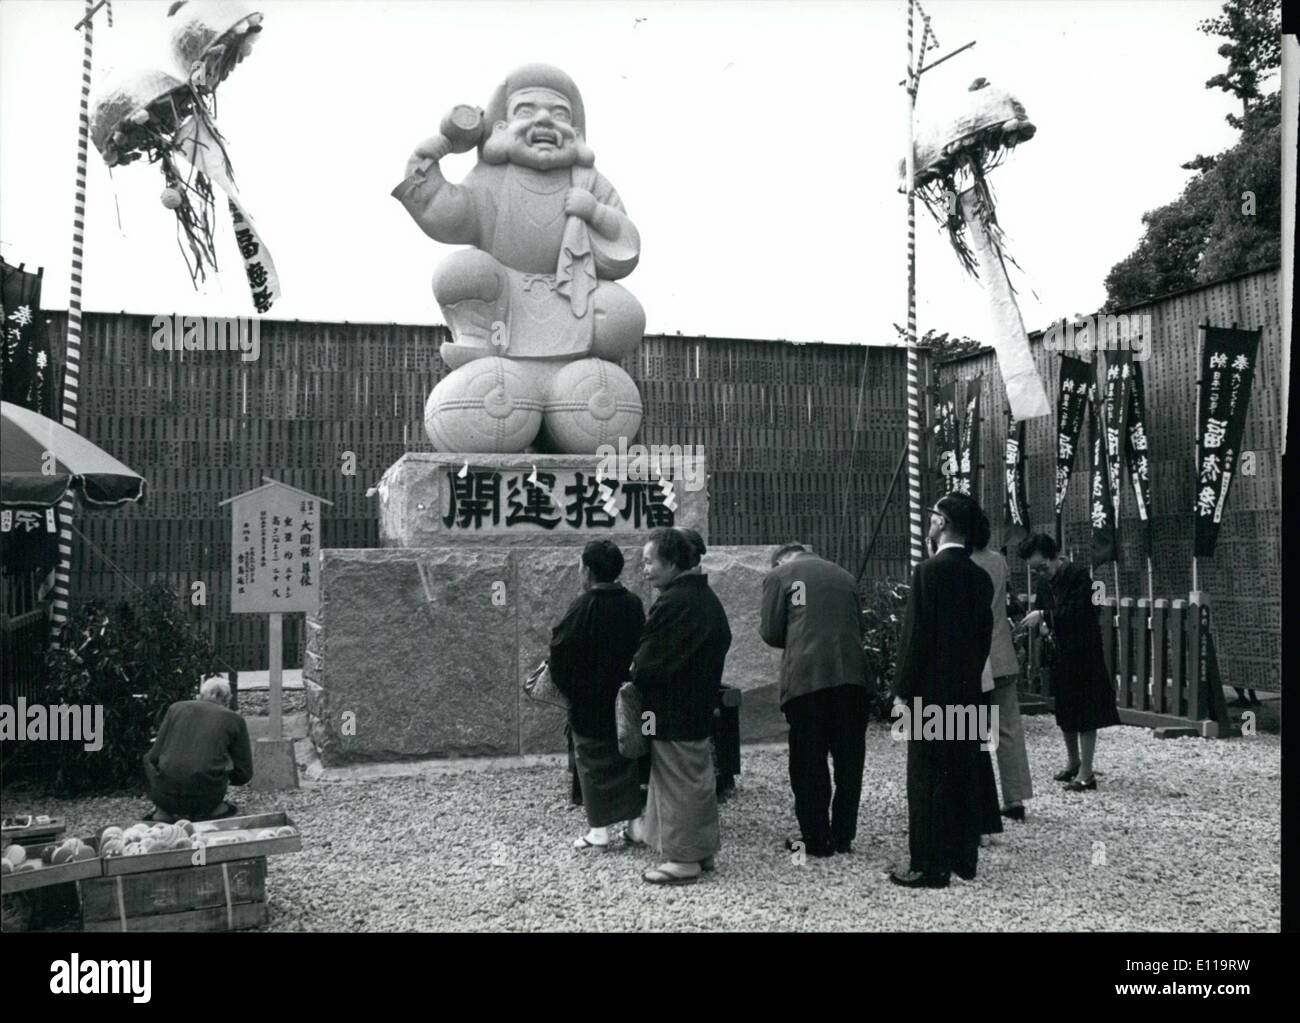 May 05, 1976 - God of wealth weighs 85-Tons: A stone image of the ''daikoku'', the god f wealth, 7-meters high, and weighing 85-tons, has been donated to the Kanda Myojin Shrine in Tokyo. It is the largest image of the ''daikoku'' in Japan. The god is depicted seated on two bales of rice, and holding a money-box. Group of Japanese are shown praying to the god. Stock Photo